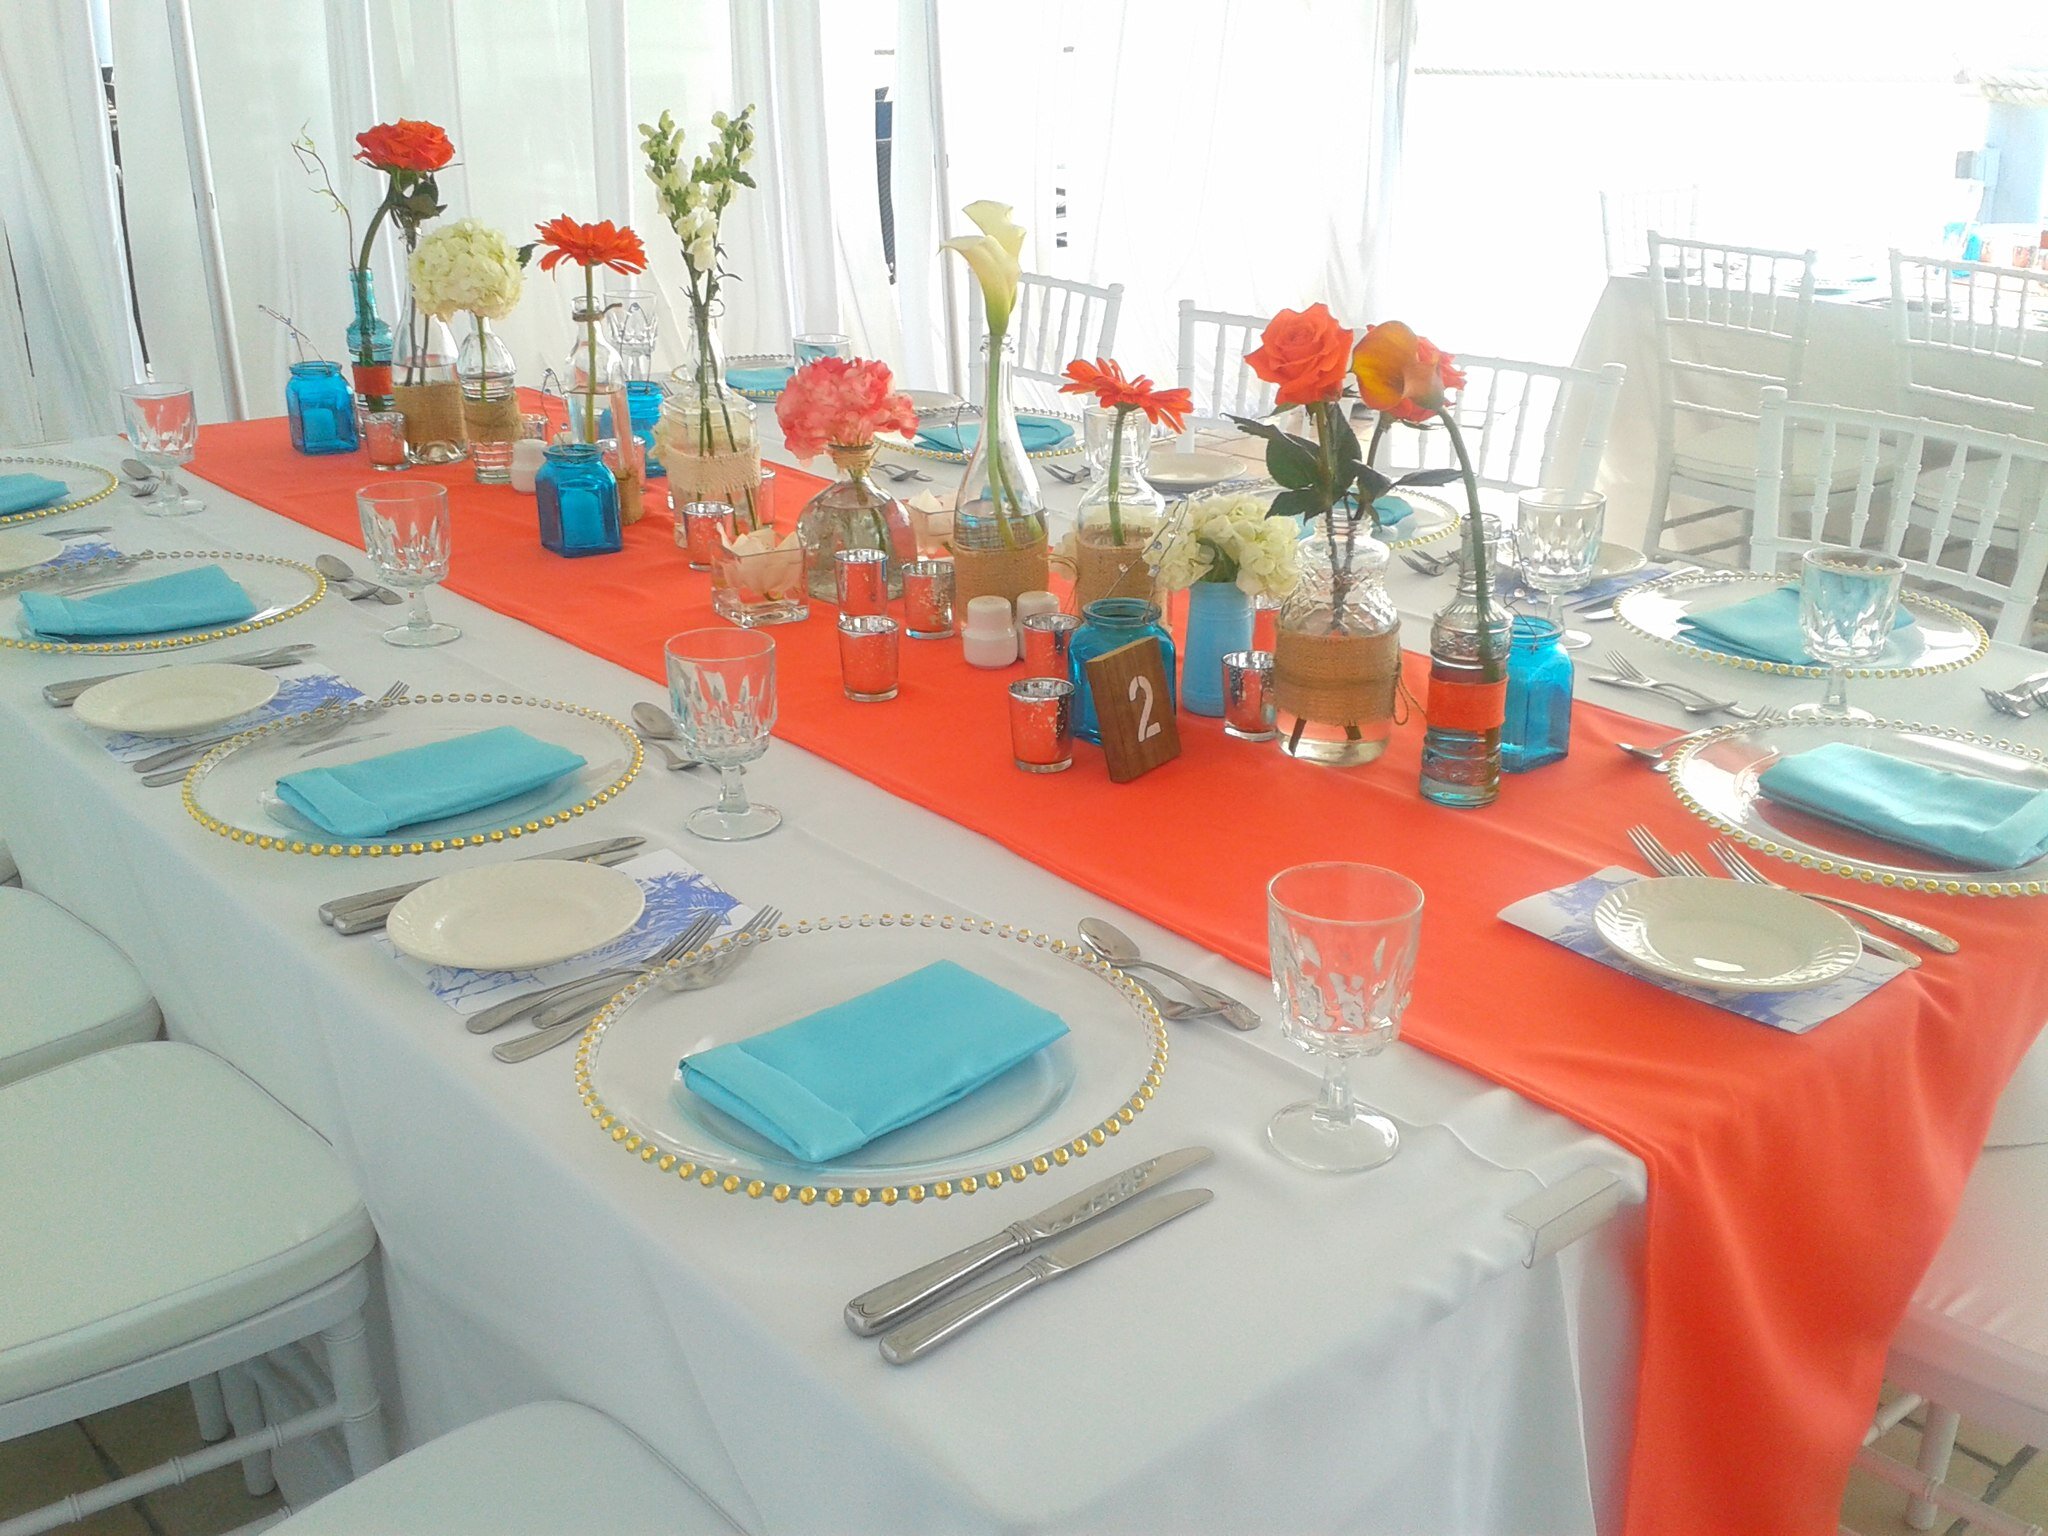 Eclectic-mix-Coral-blue-table-flowers_Easy-Resize.com.jpg